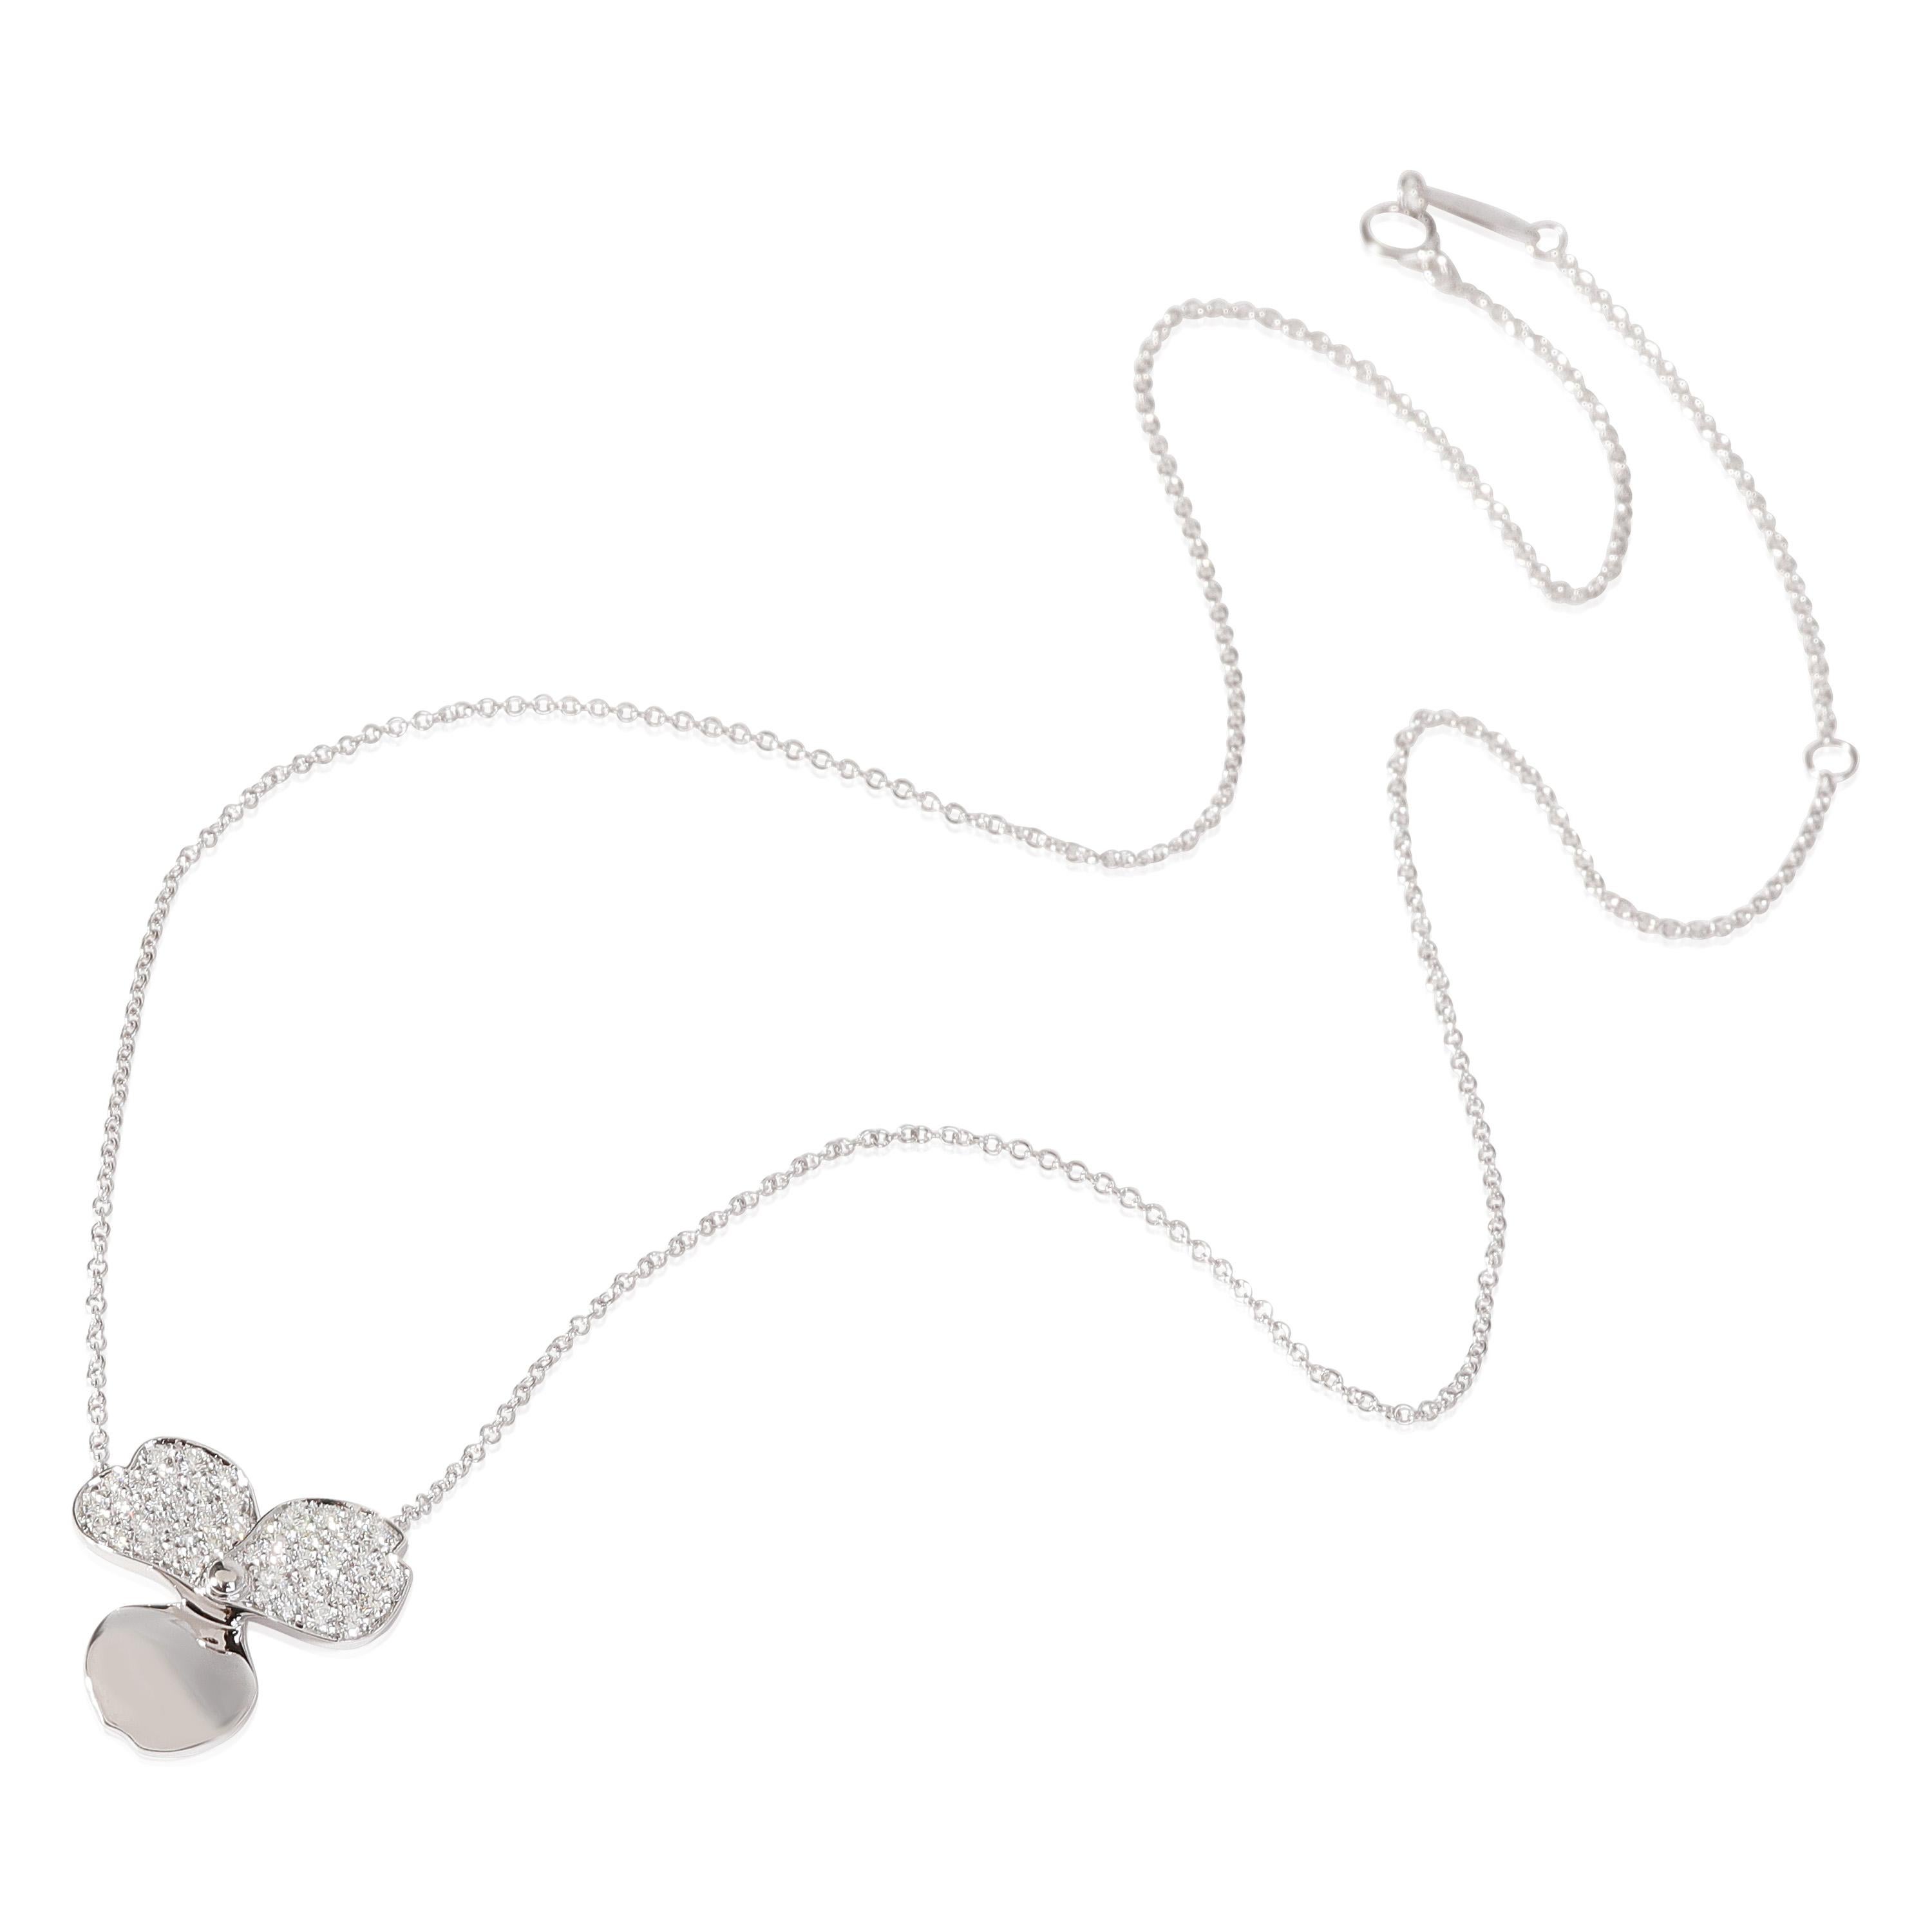 Tiffany & Co. Paper Flowers Necklace in Platinum 0.33 ctw

PRIMARY DETAILS
SKU: 121328
Listing Title: Tiffany & Co. Paper Flowers Necklace in Platinum 0.33 ctw
Condition Description: Retails for 5500 USD. In excellent condition and recently